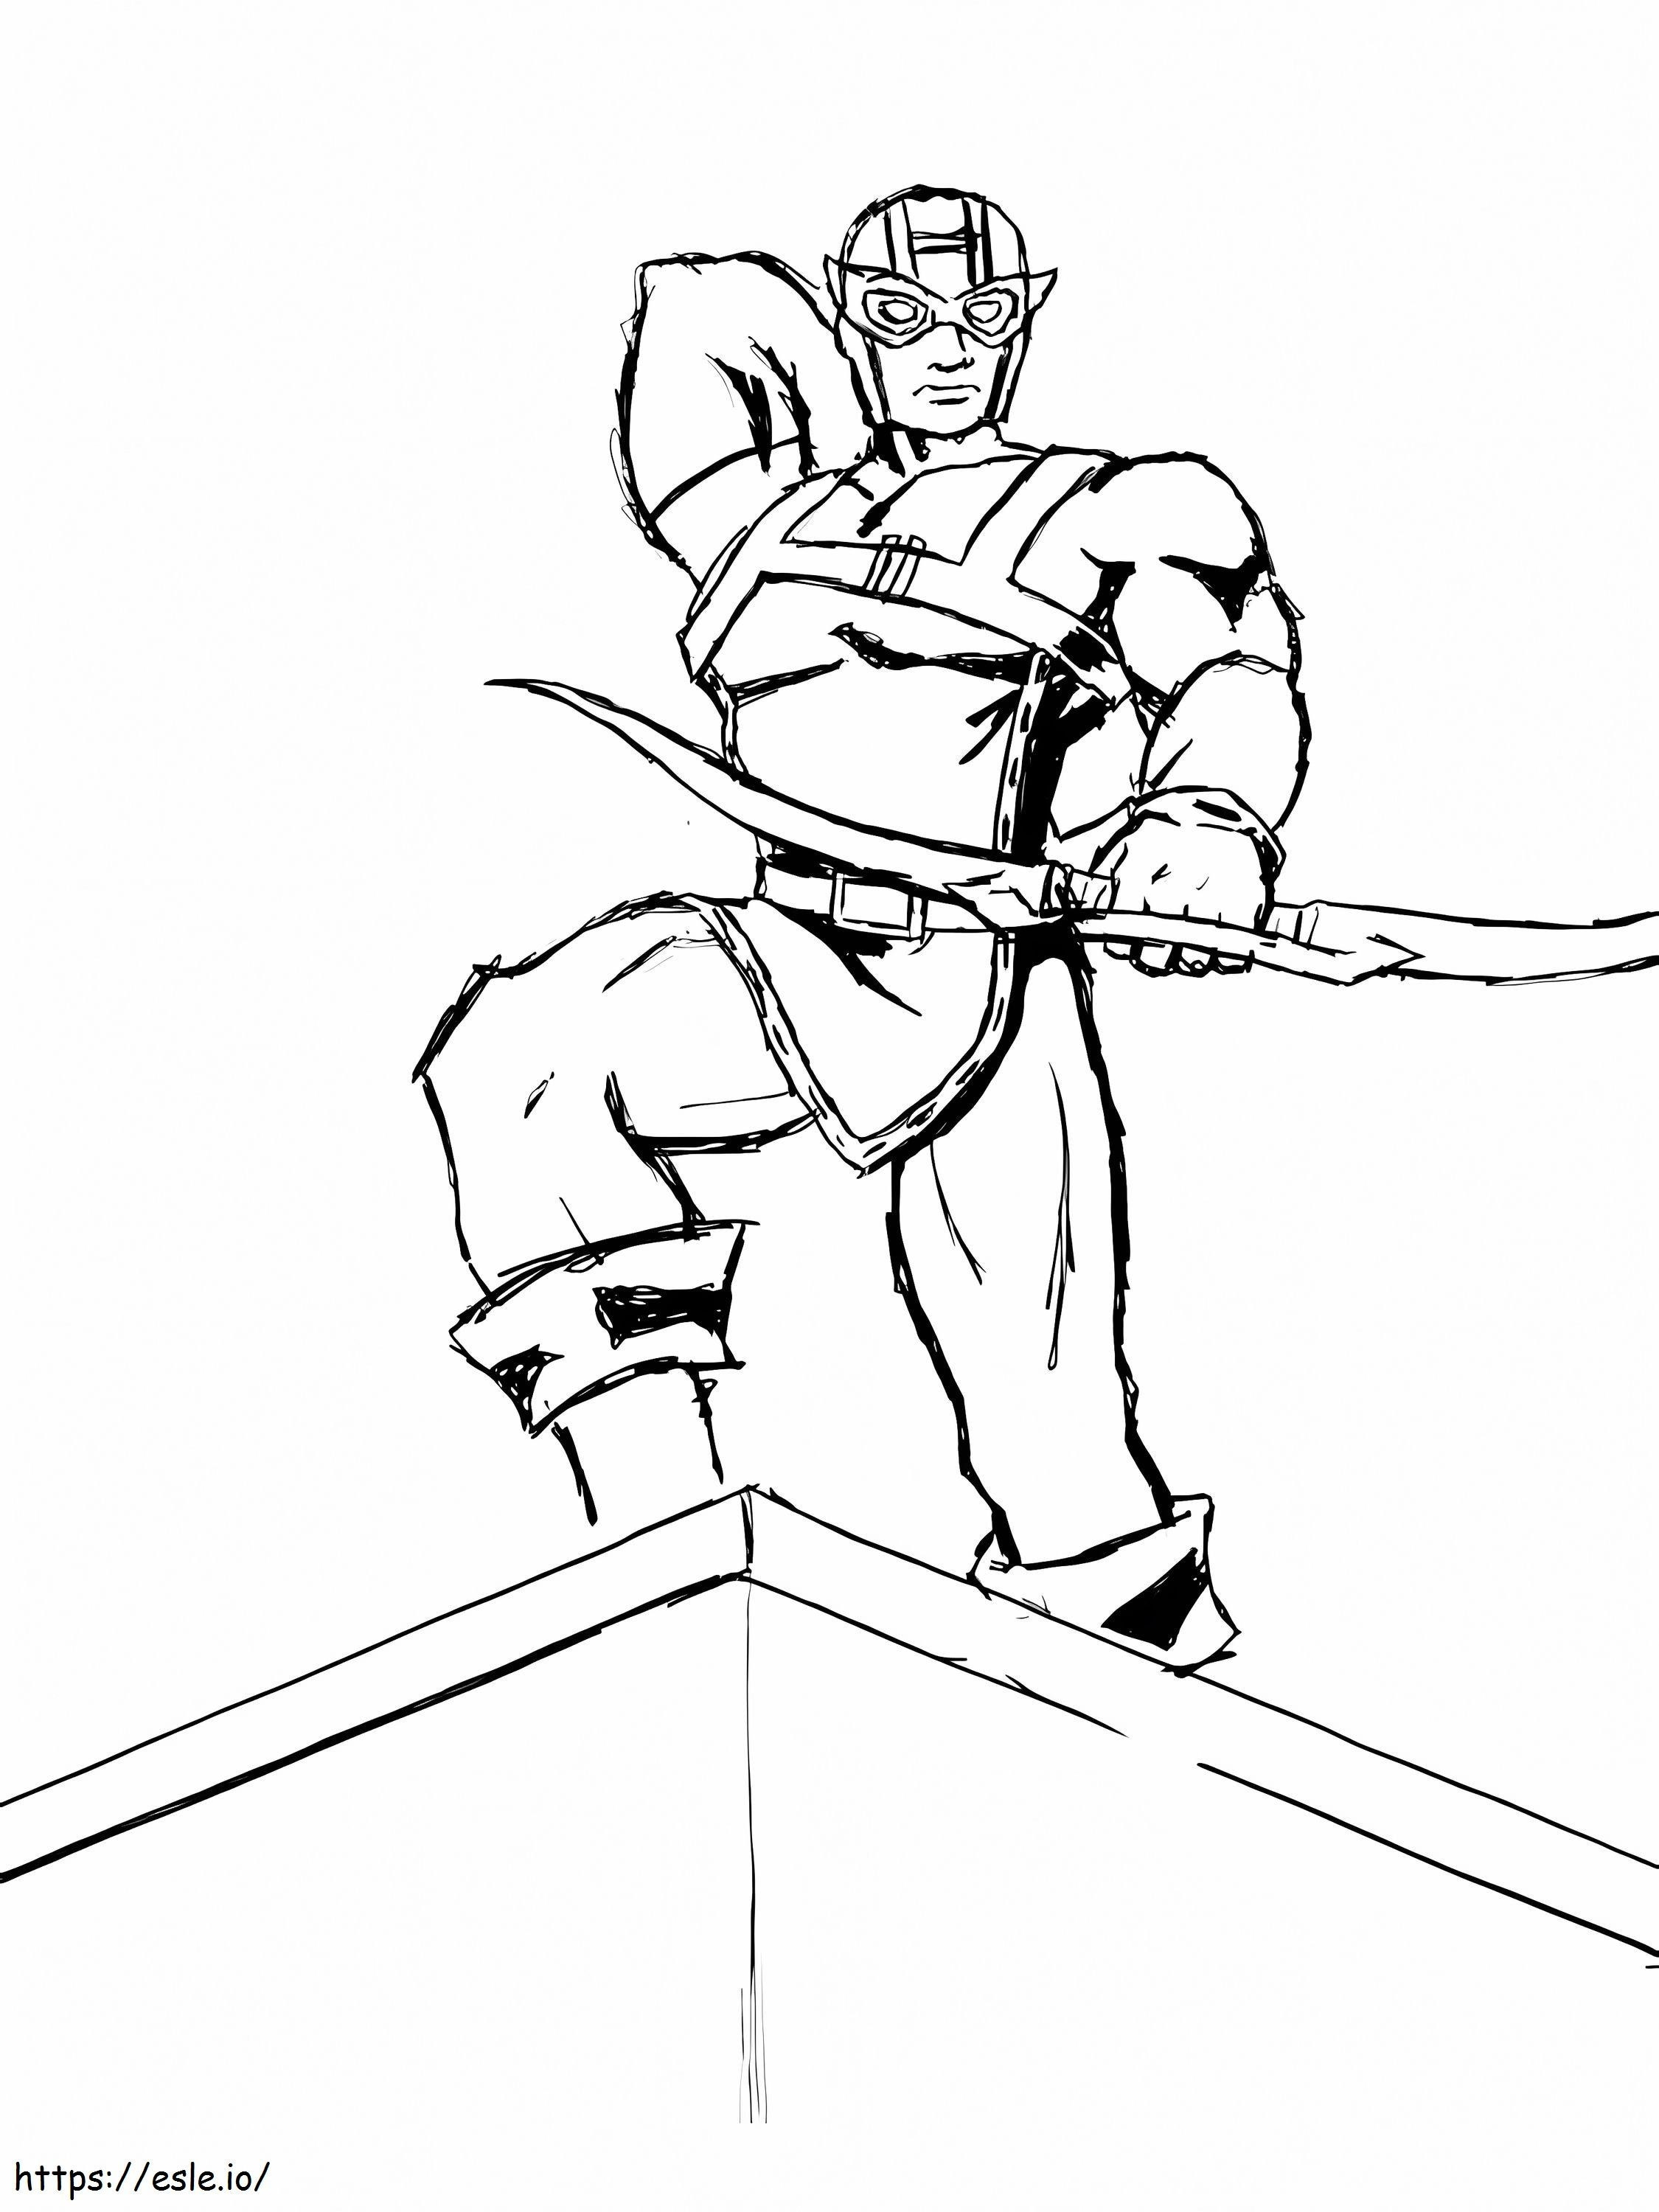 Hawkeye On Roof coloring page